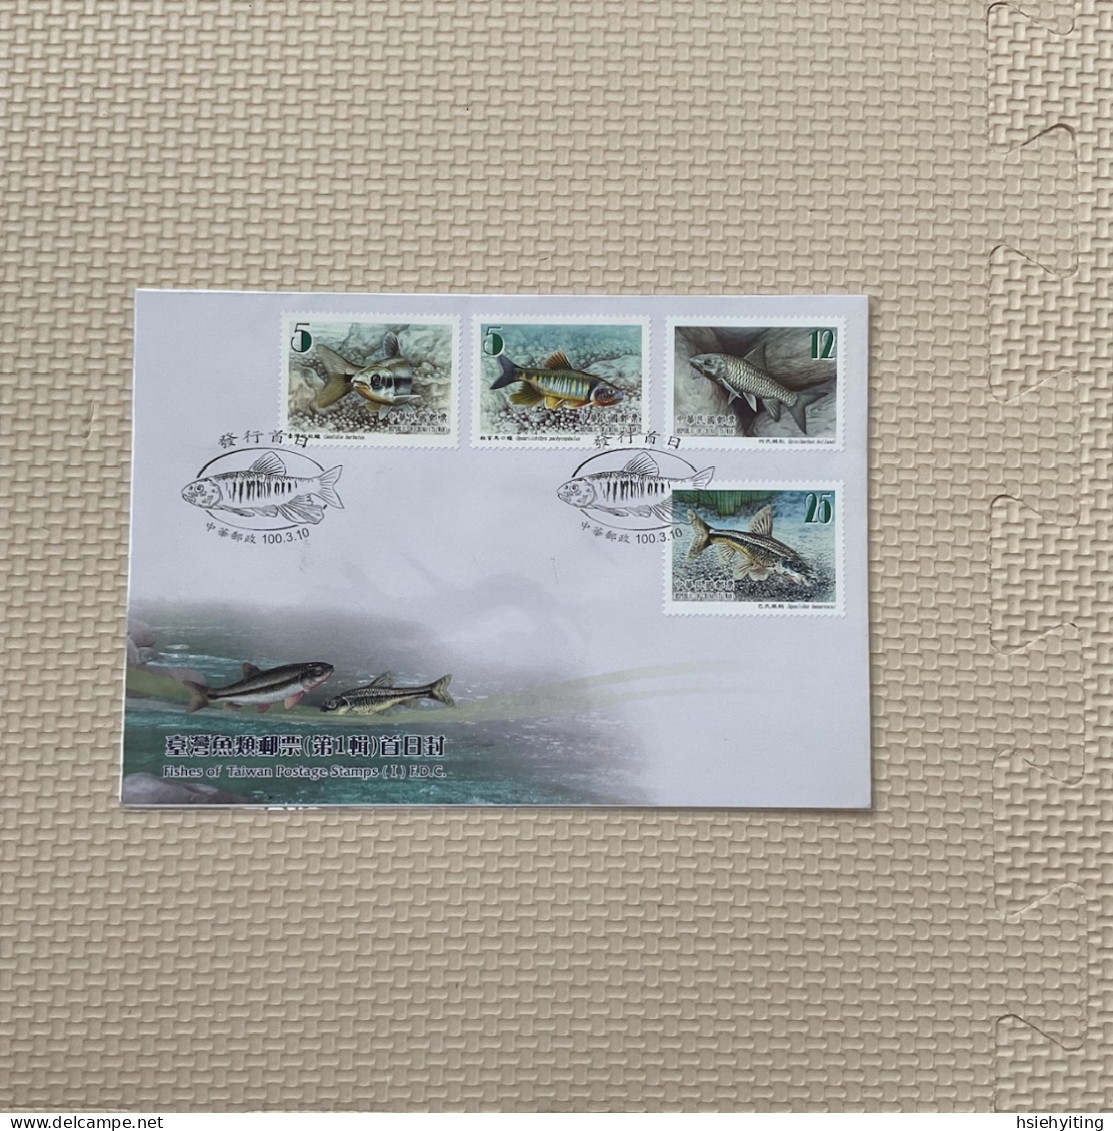 Taiwan Postage Stamps - Fishes